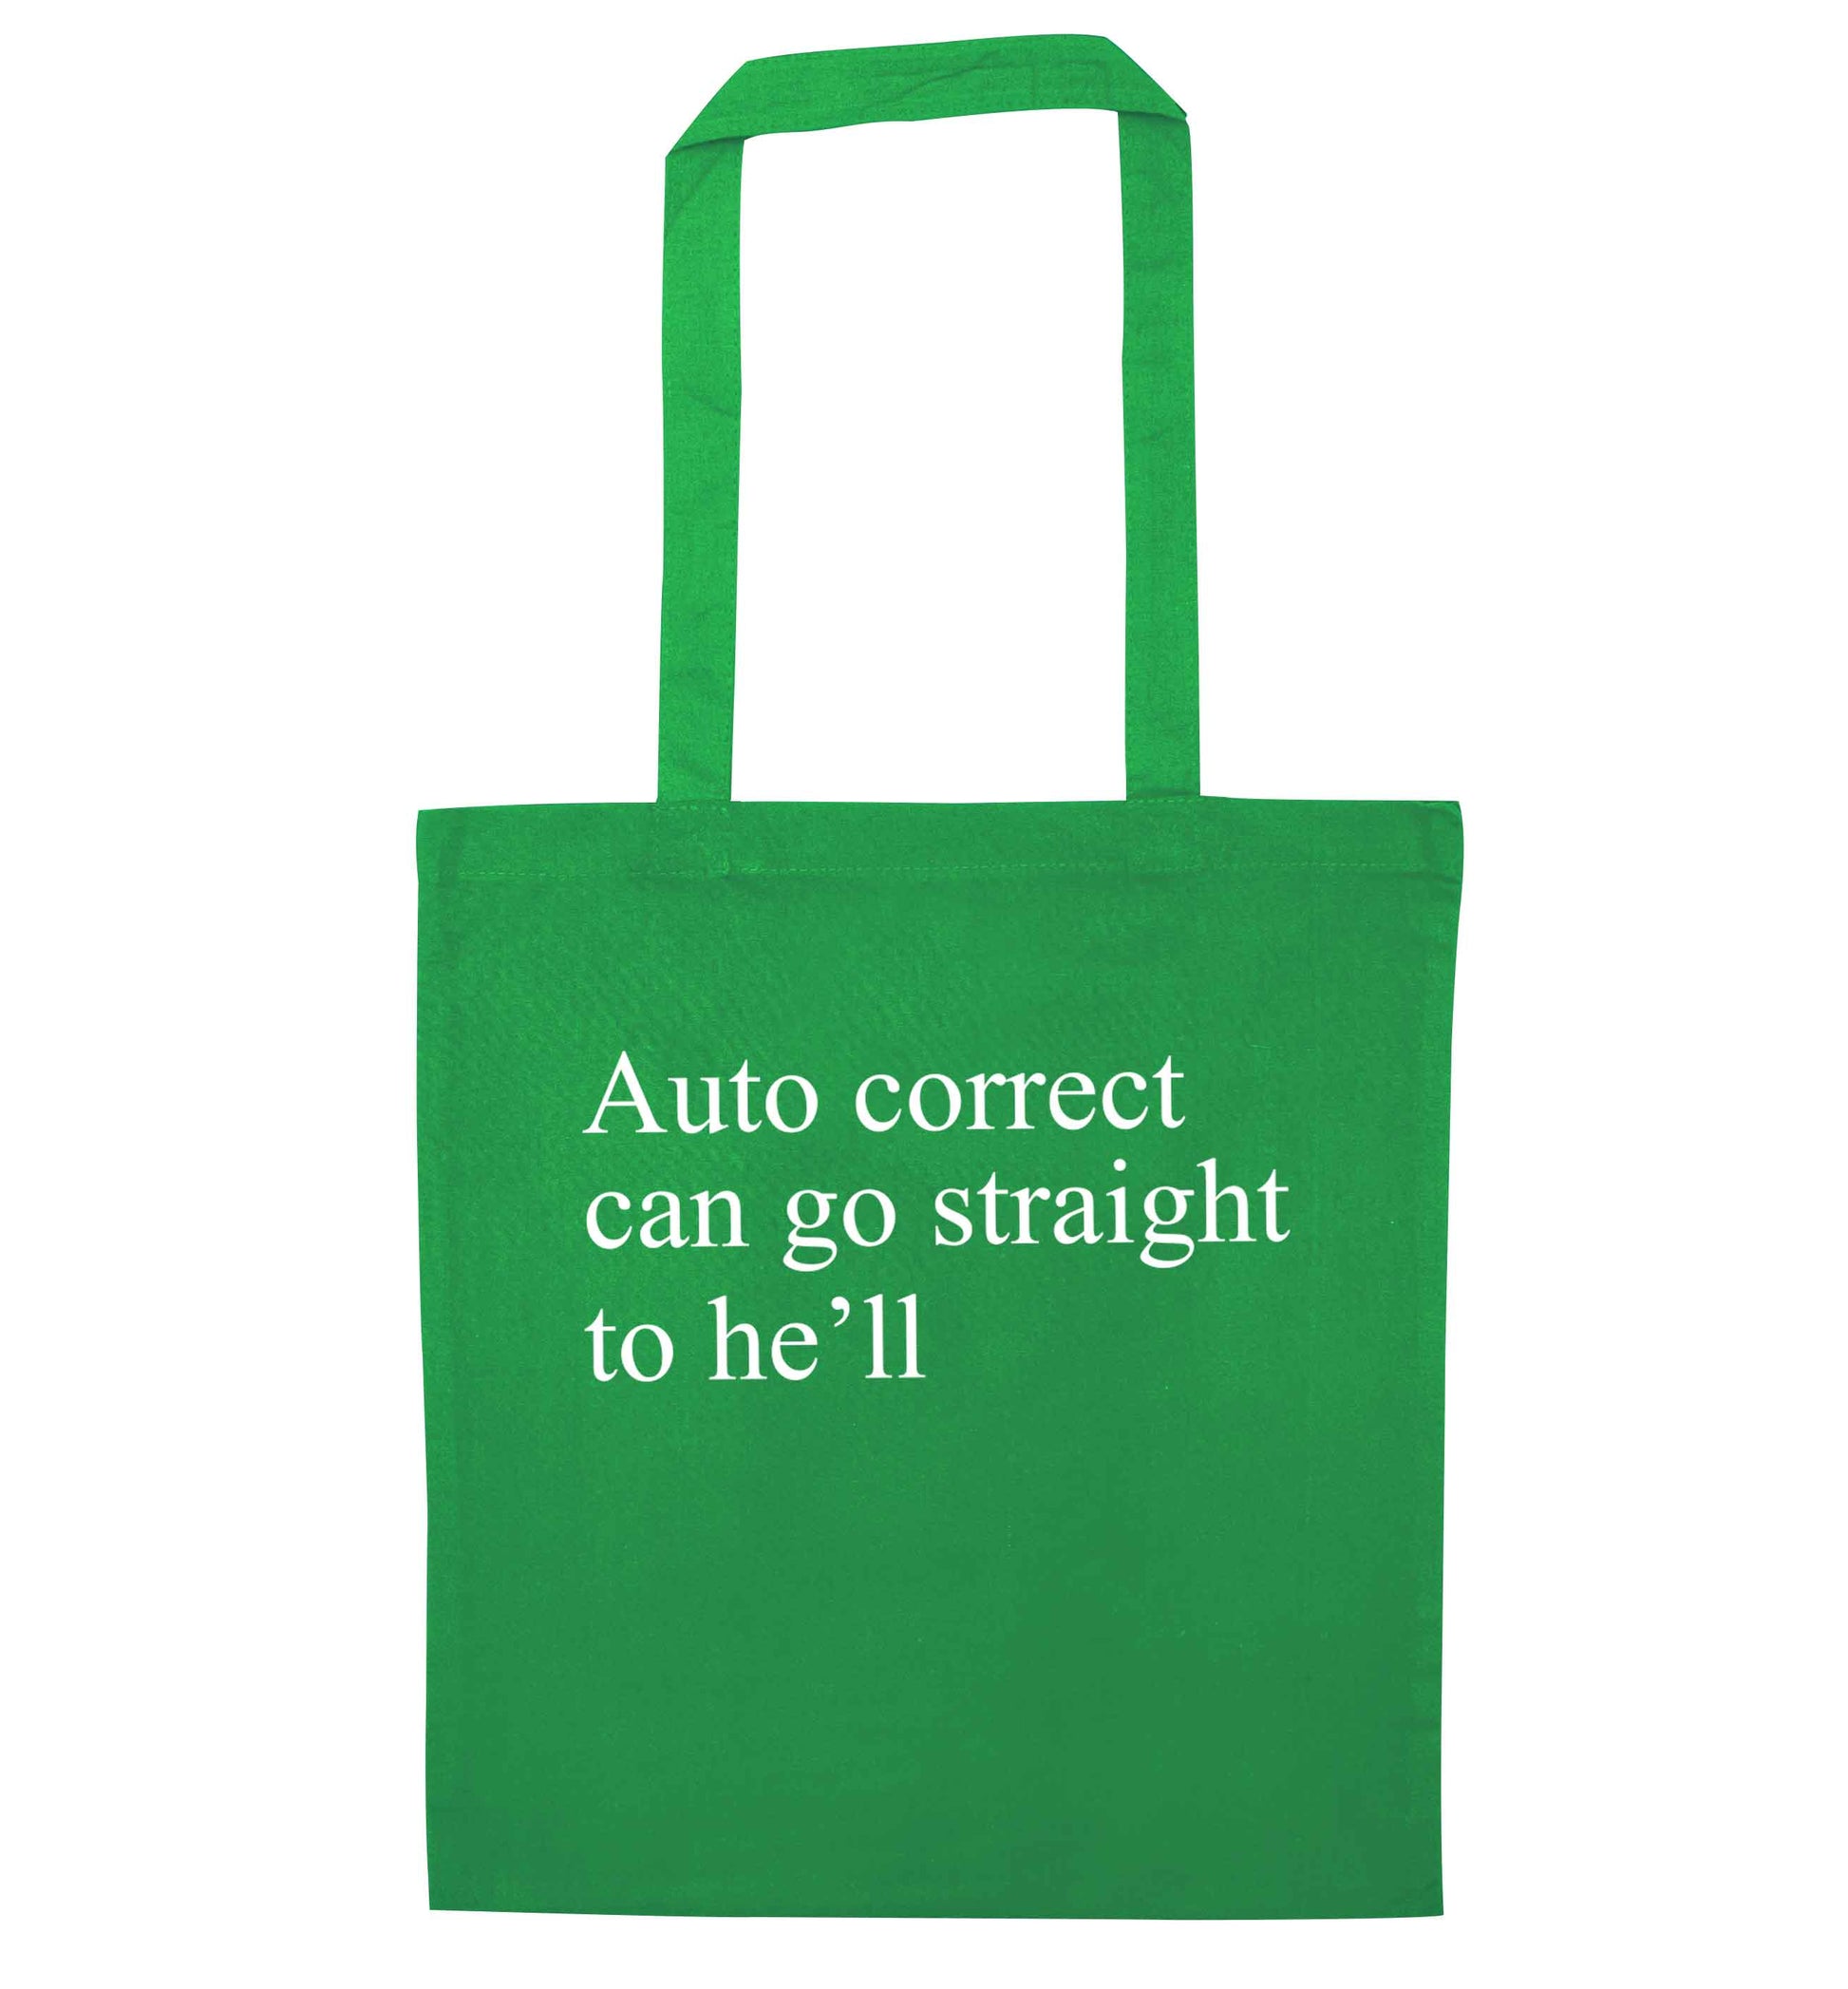 Auto correct can go straight to he'll green tote bag